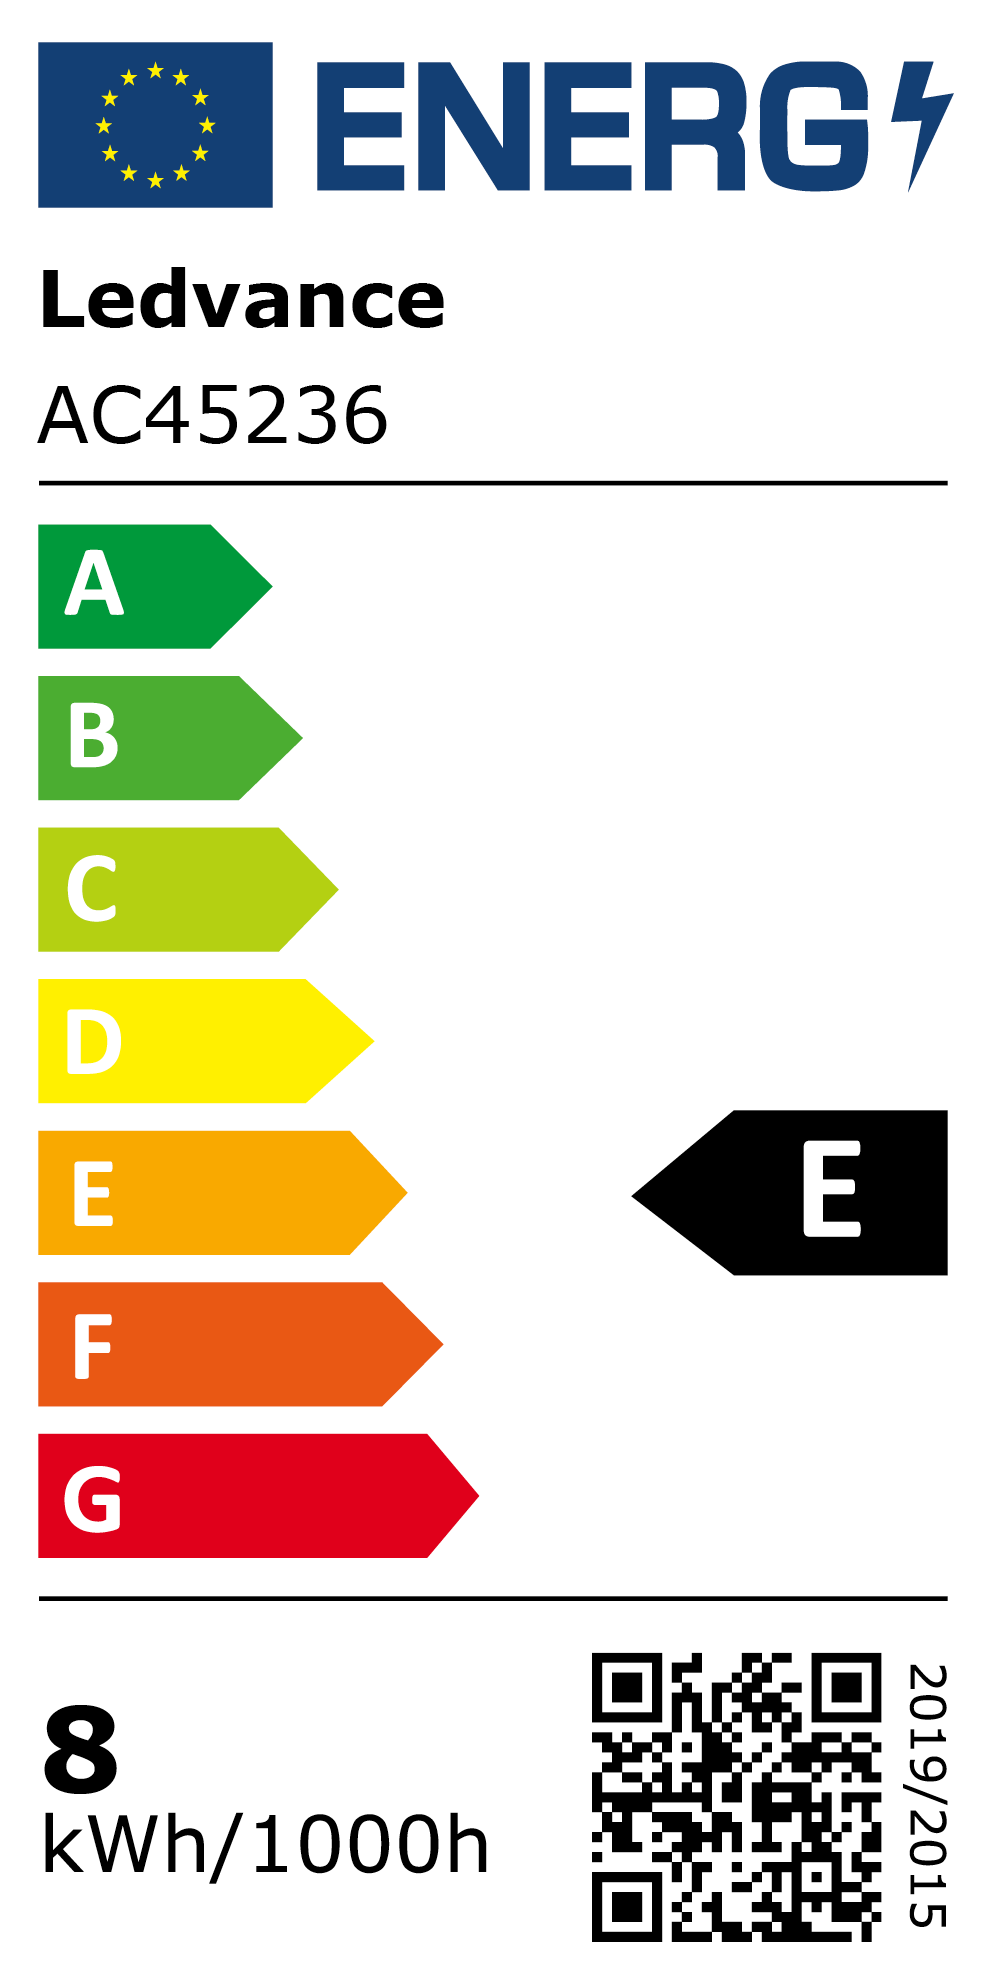 New 2021 Energy Rating Label: MPN AC45236